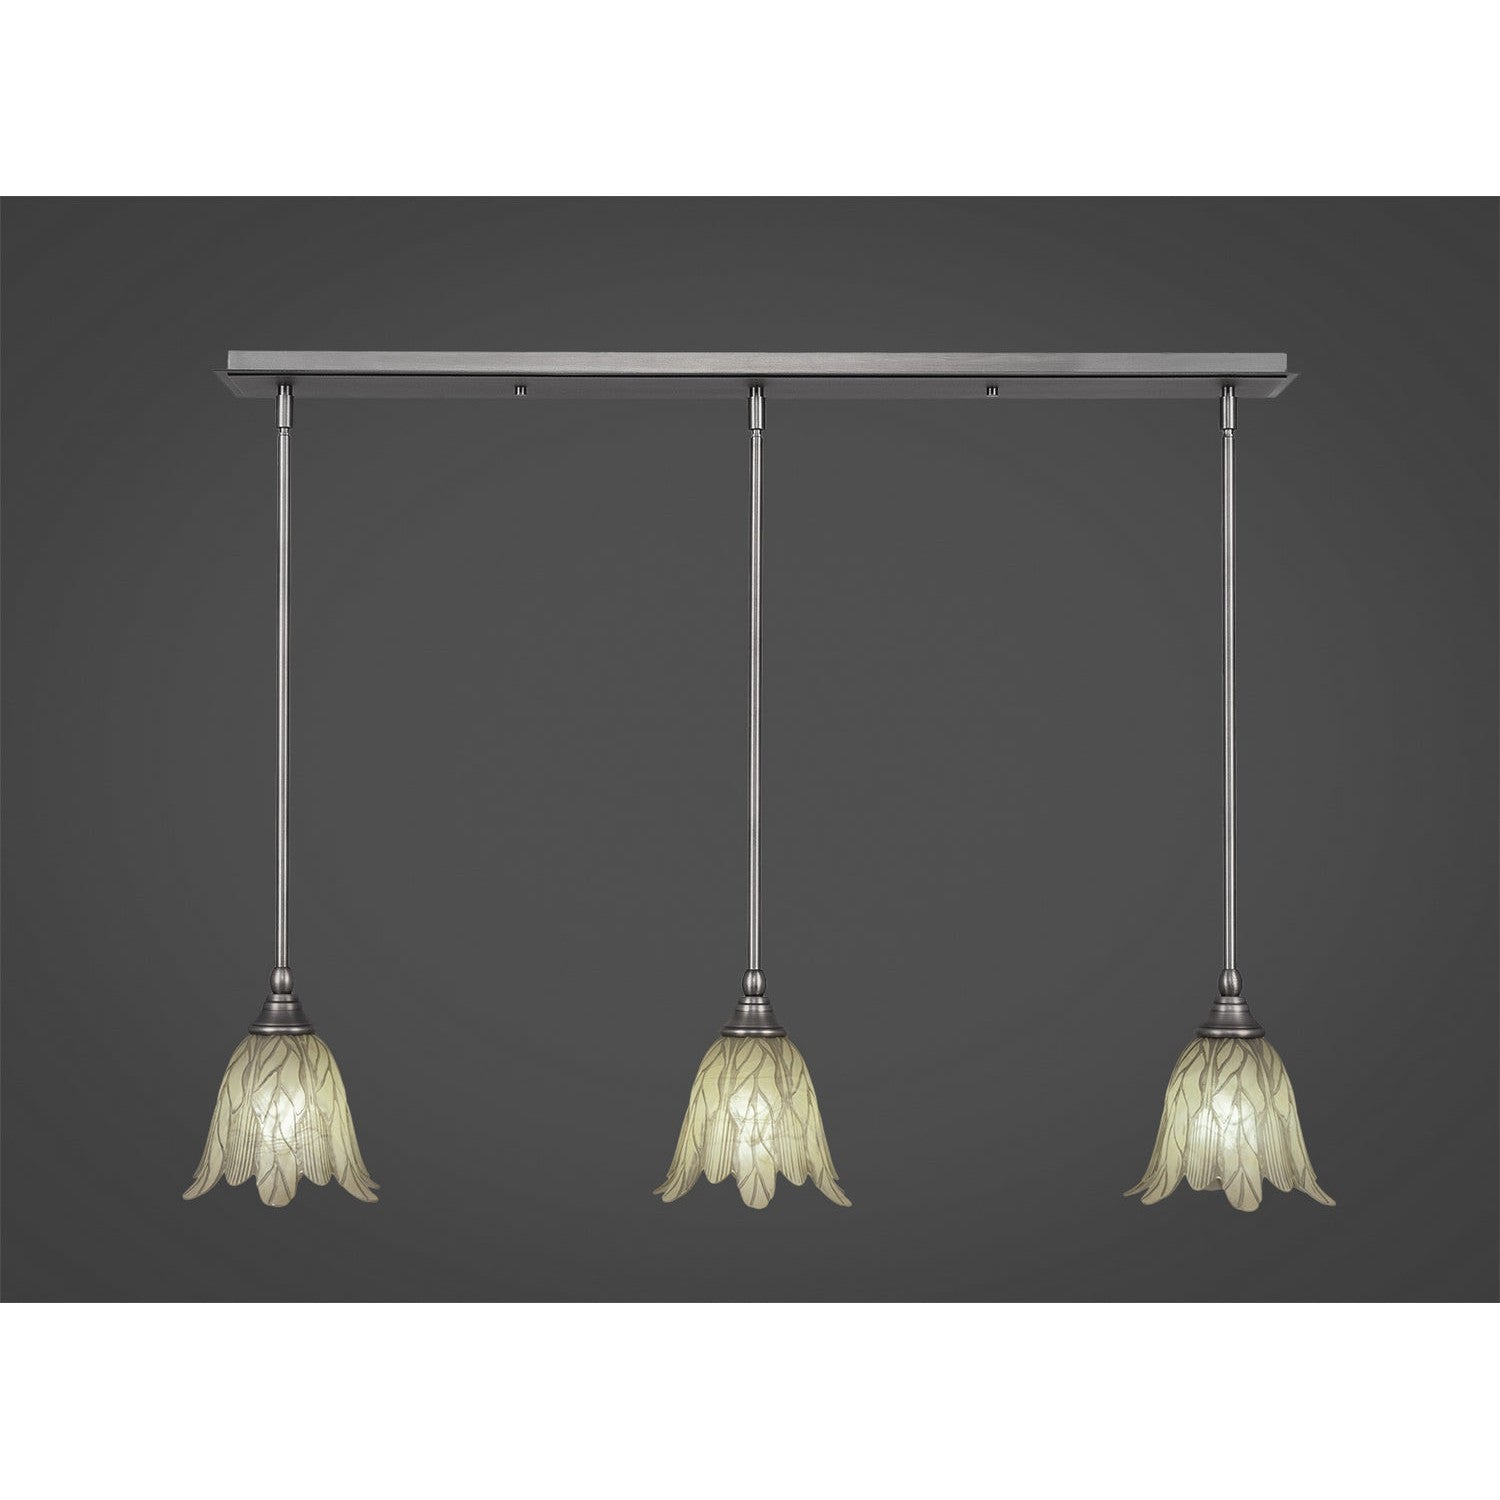 Toltec Any 36-bn-1025 Pendant Light - Brushed Nickel